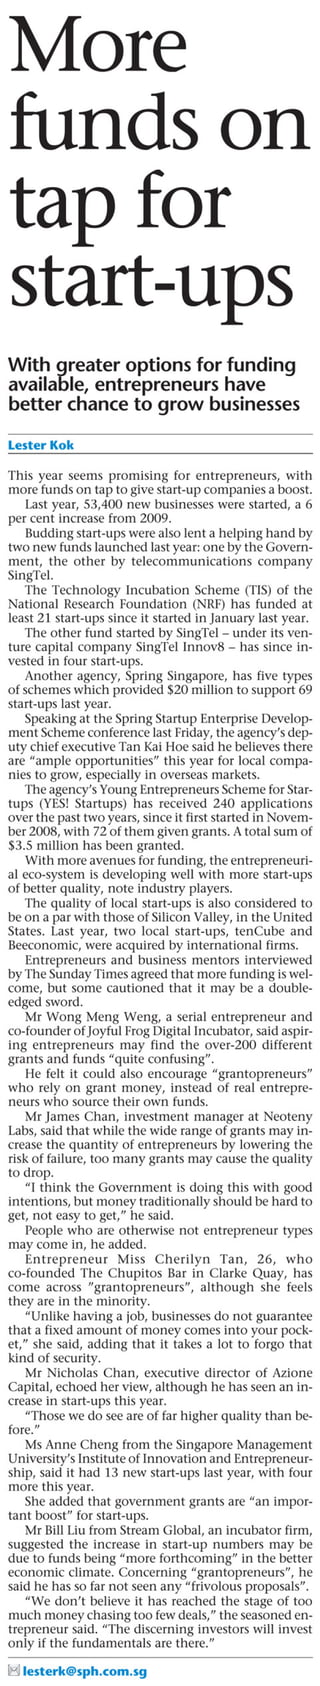 More funds on tap for start-ups